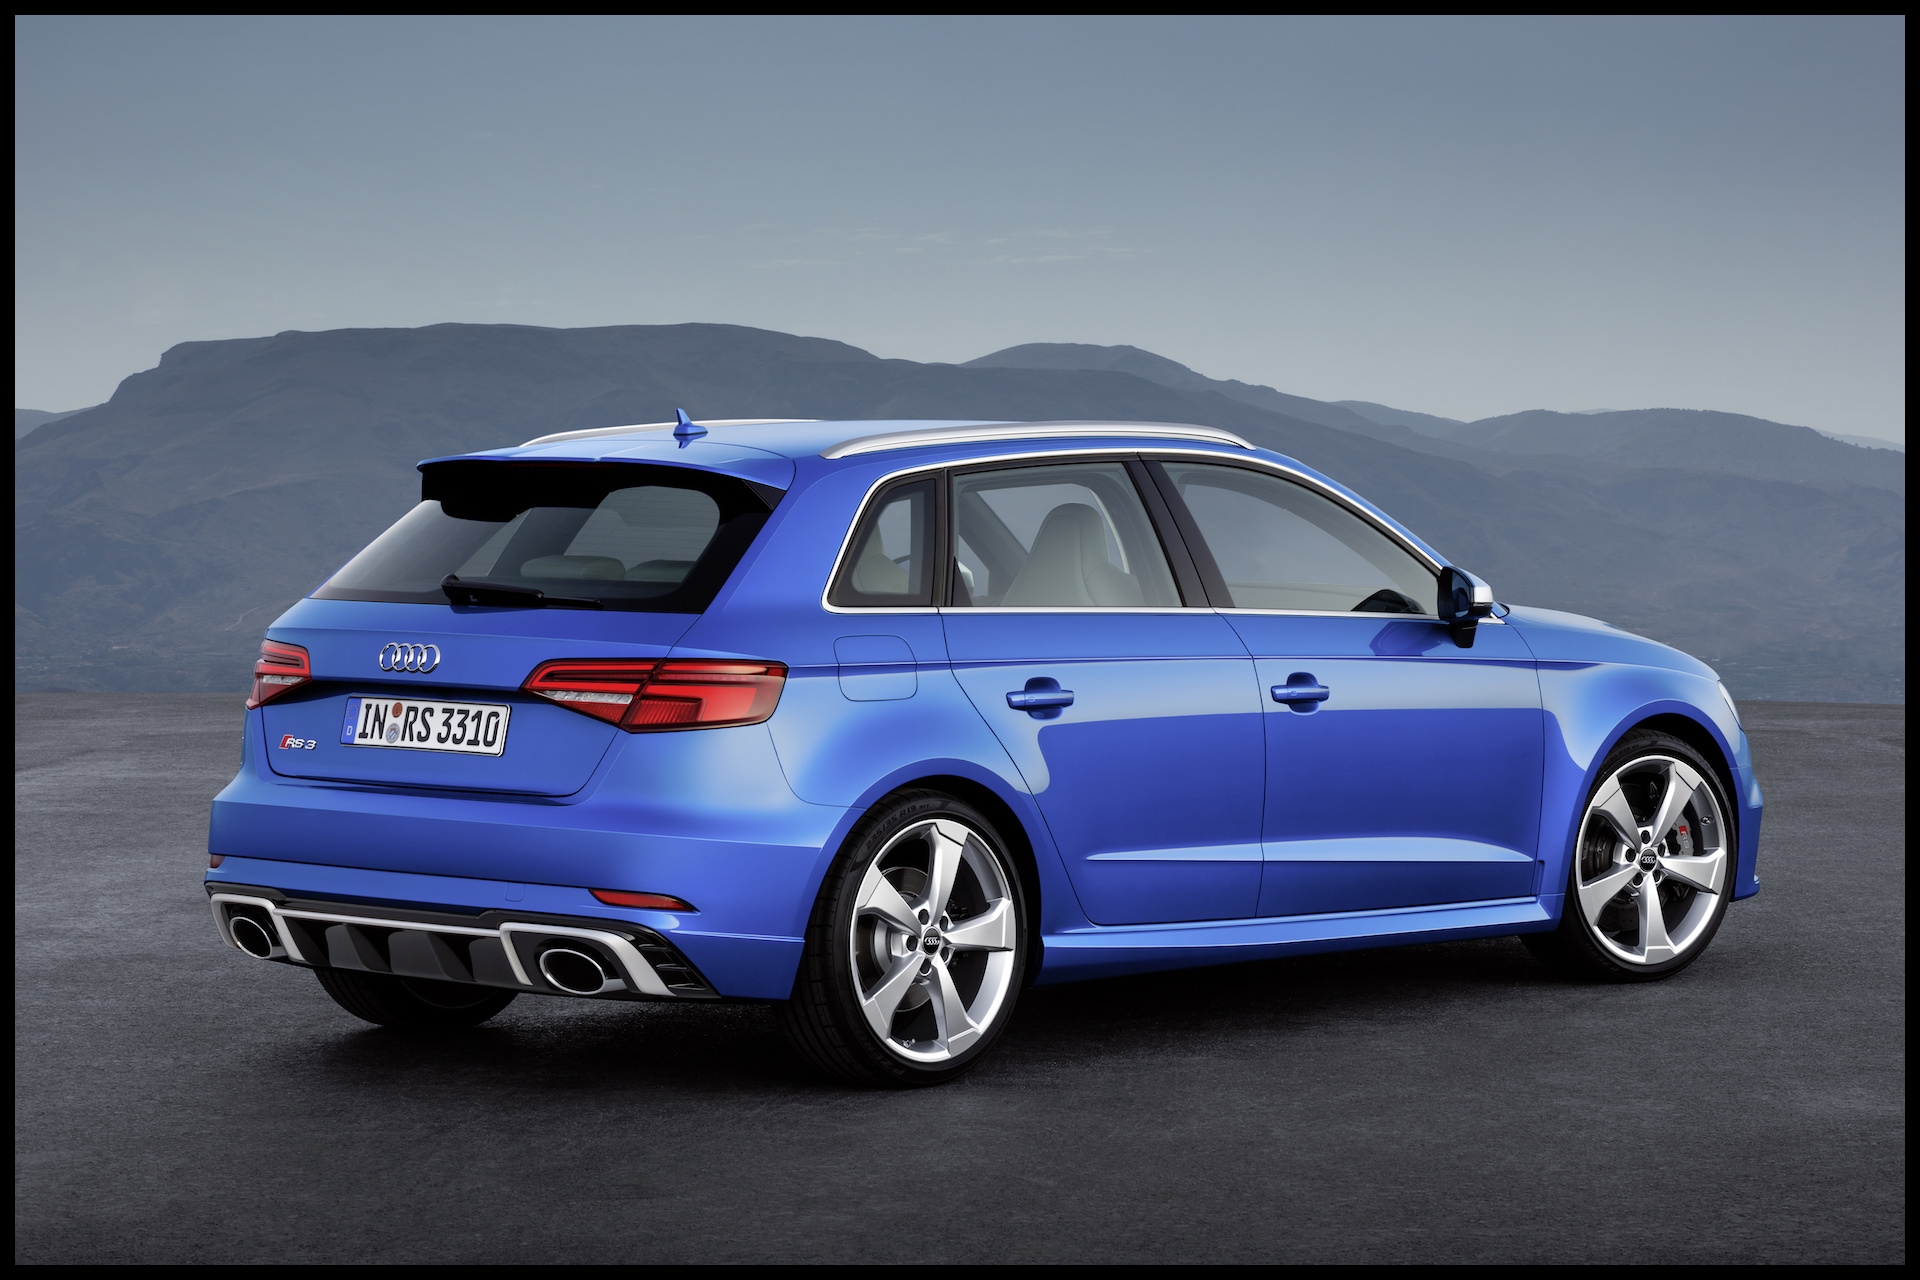 The new Audi RS3 has quattro of course